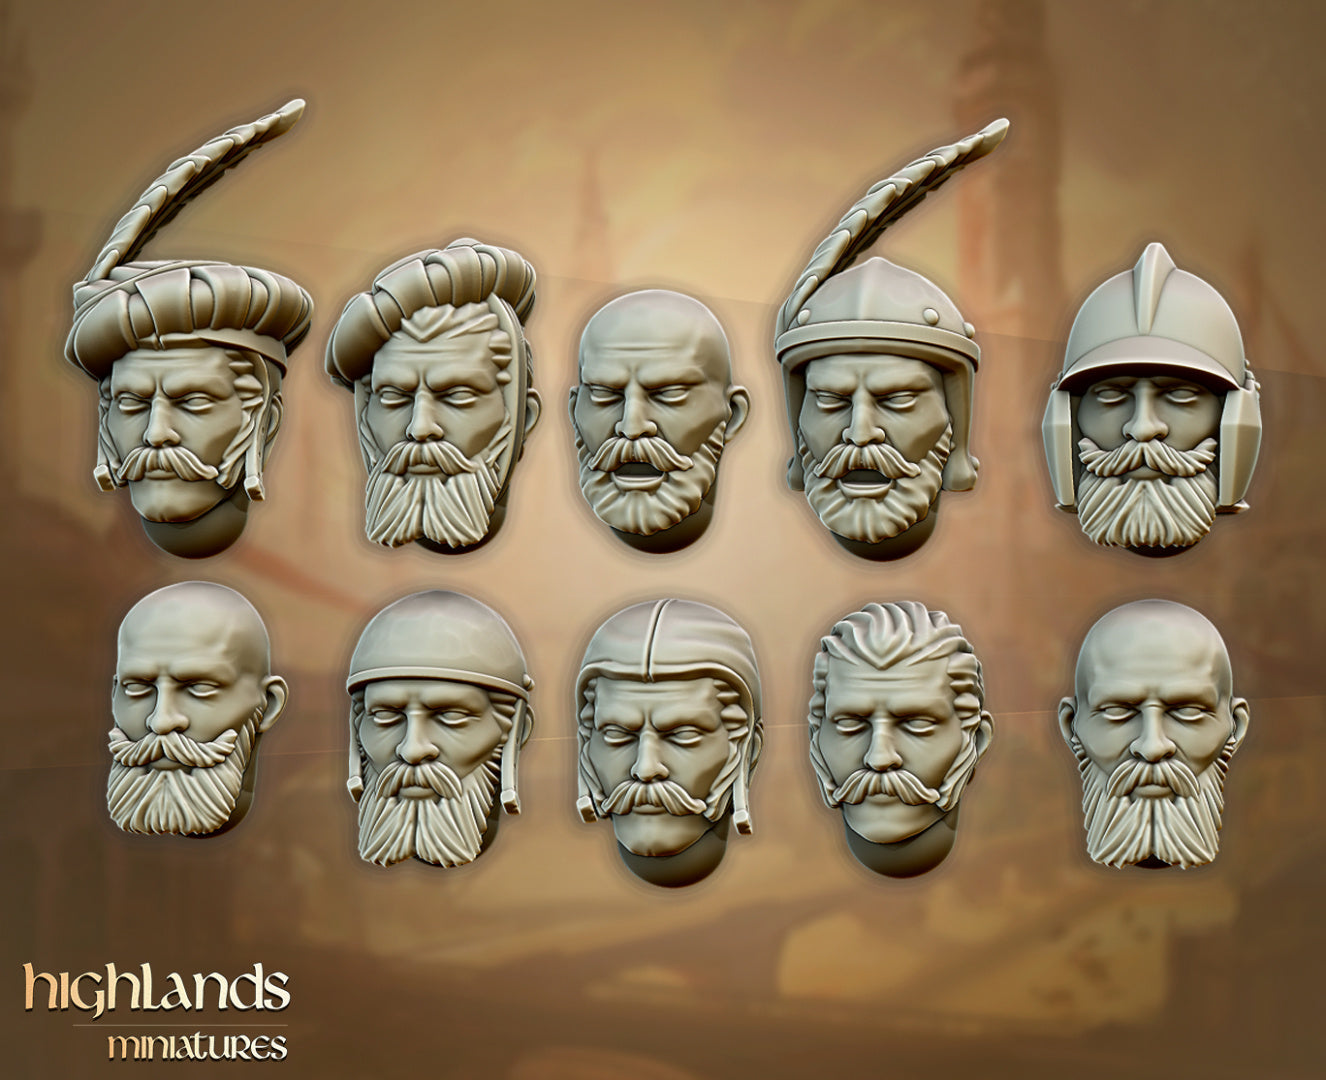 Sunland Imperial Troops with Swords by Highlands Miniatures